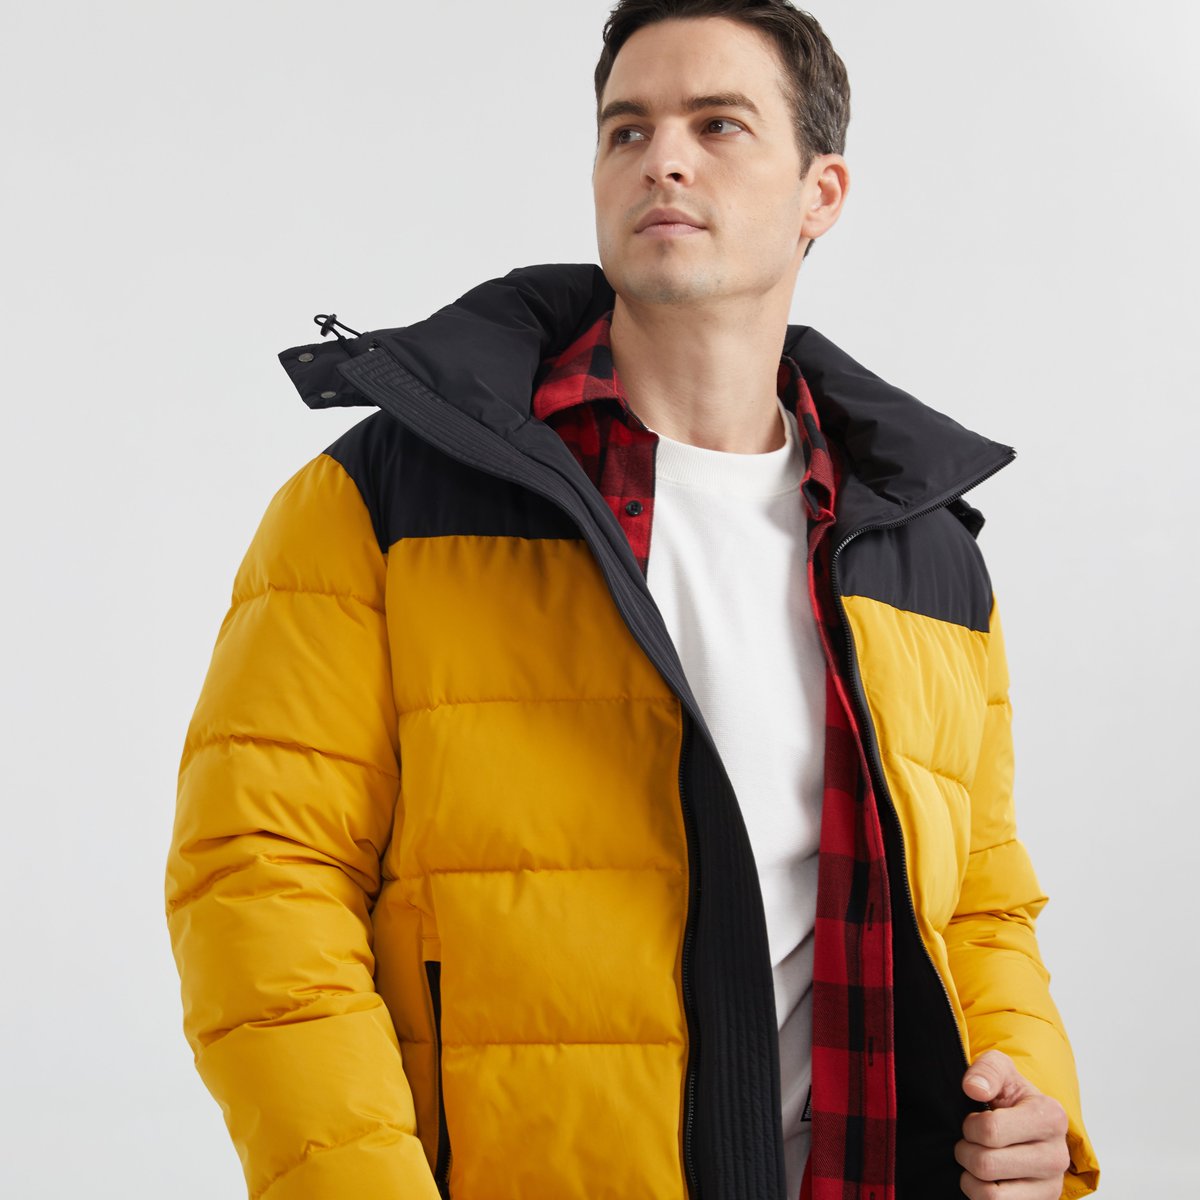 Wind, rain, and snow resistance; thickened stand collar design; and durable fabrics designed for the unpredictable and harshly cold season.

#orolay #orolayofficial #pufferjacket #windproofcoat #winteroutfits #recycledmaterial #mencoat #winterjacket